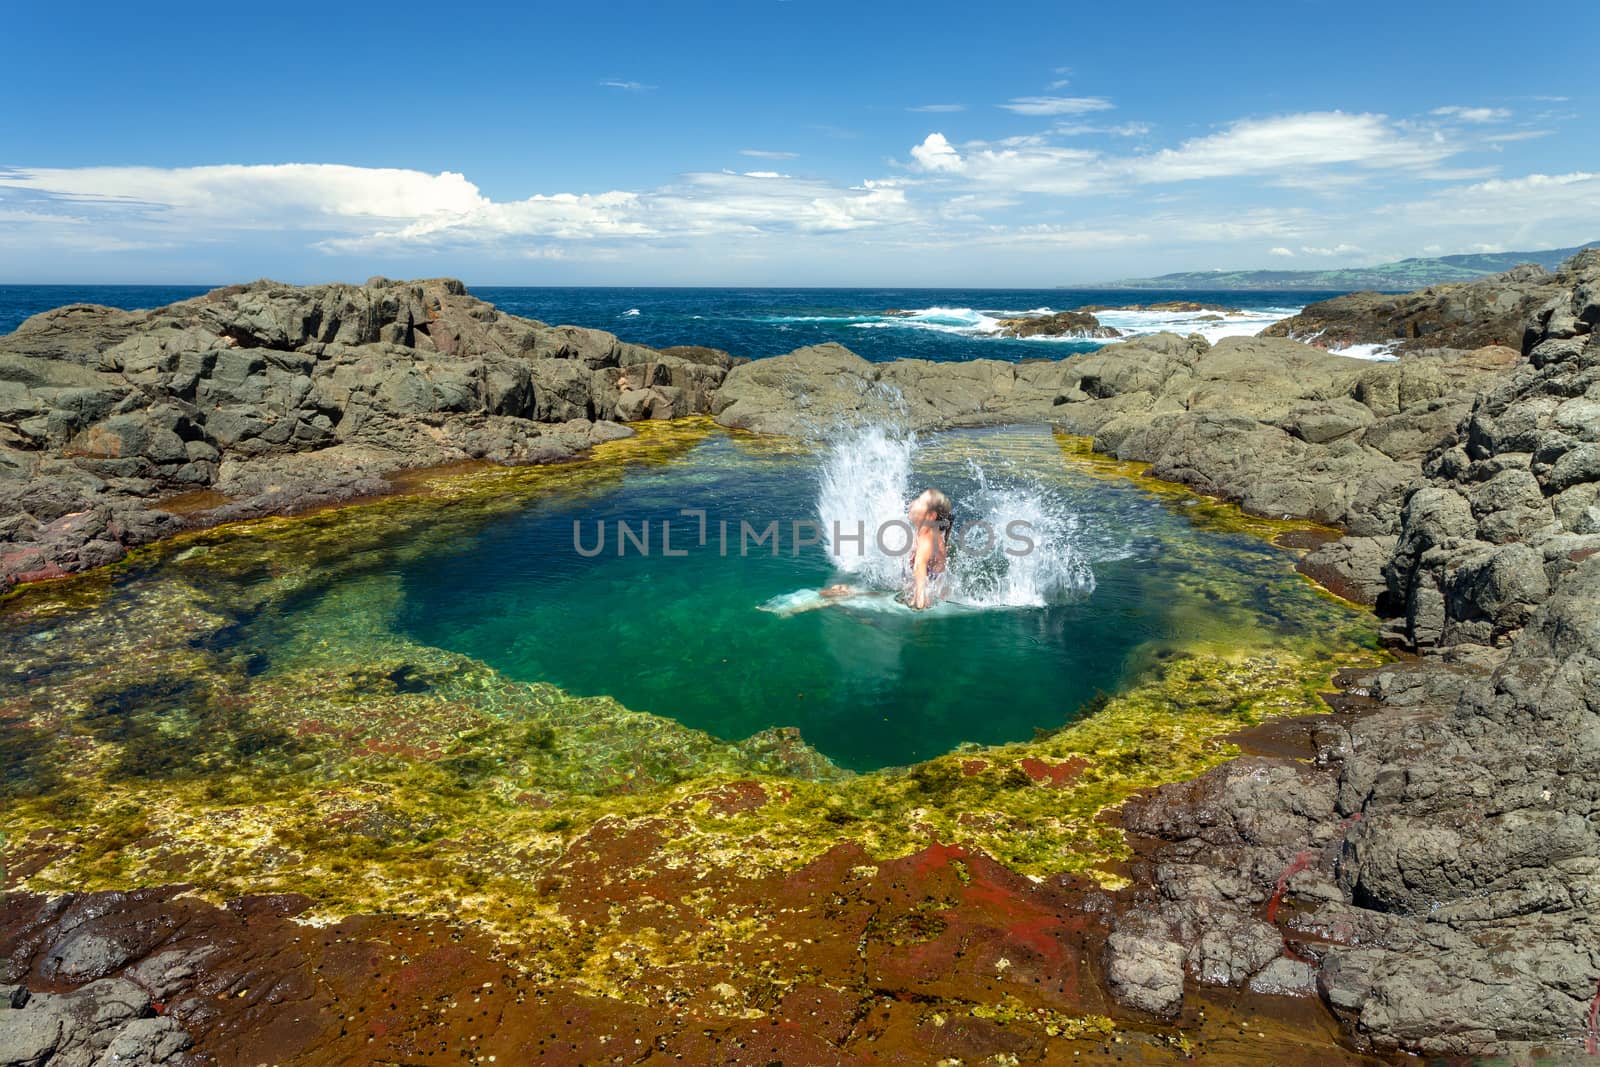 Female makes a splash after jumping into a beautiful rock pool south coast of NSW, Australia